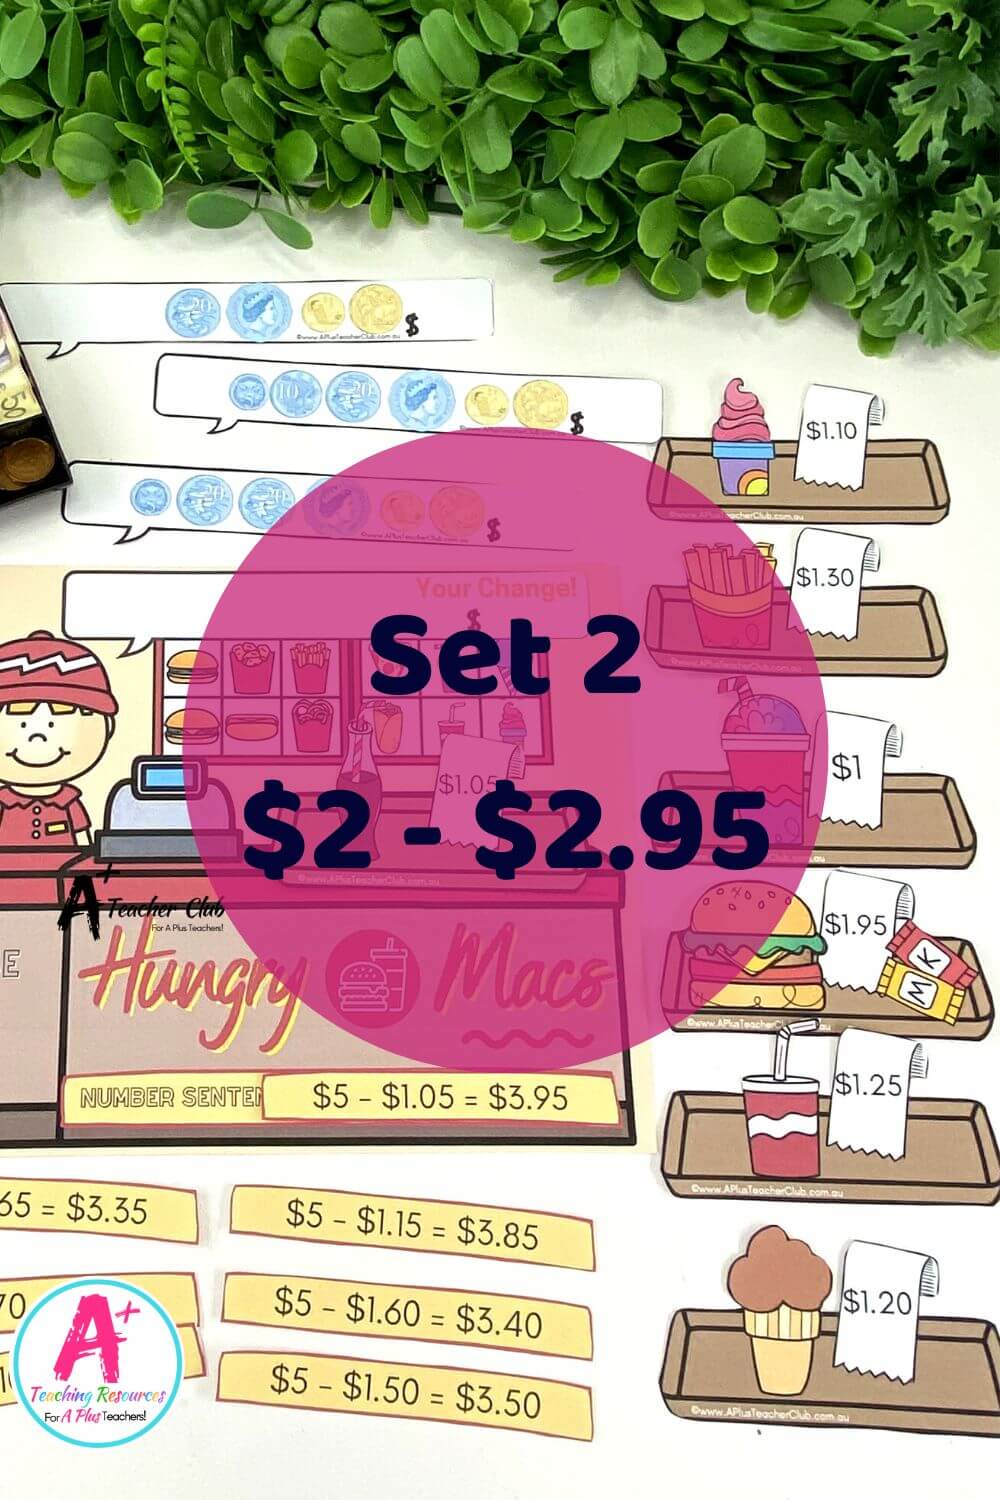 Counting Change Games - Fast Food Set 2 ($2-$2.95)